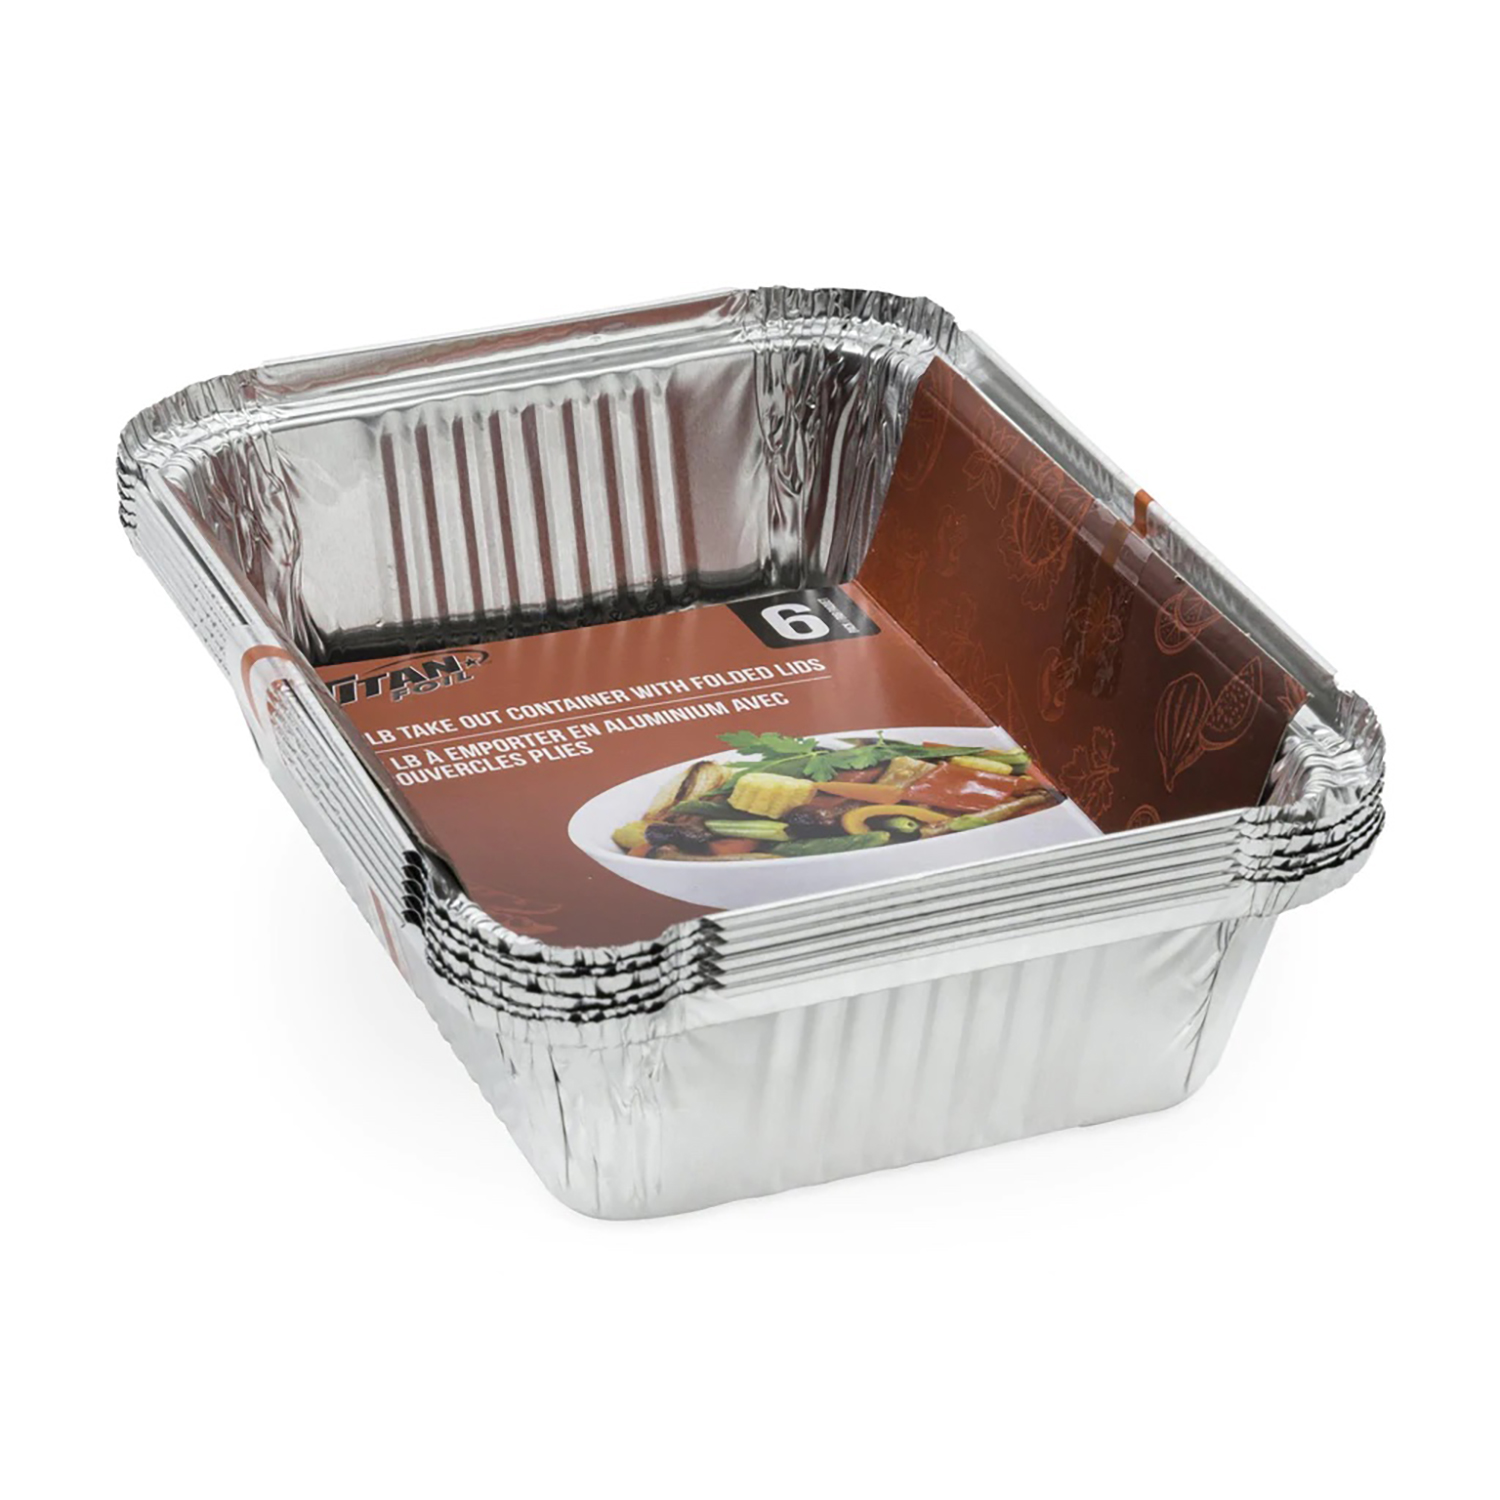 Titan Foil - Aluminum 2 lb takeout containers with folded lids, pk. of 6